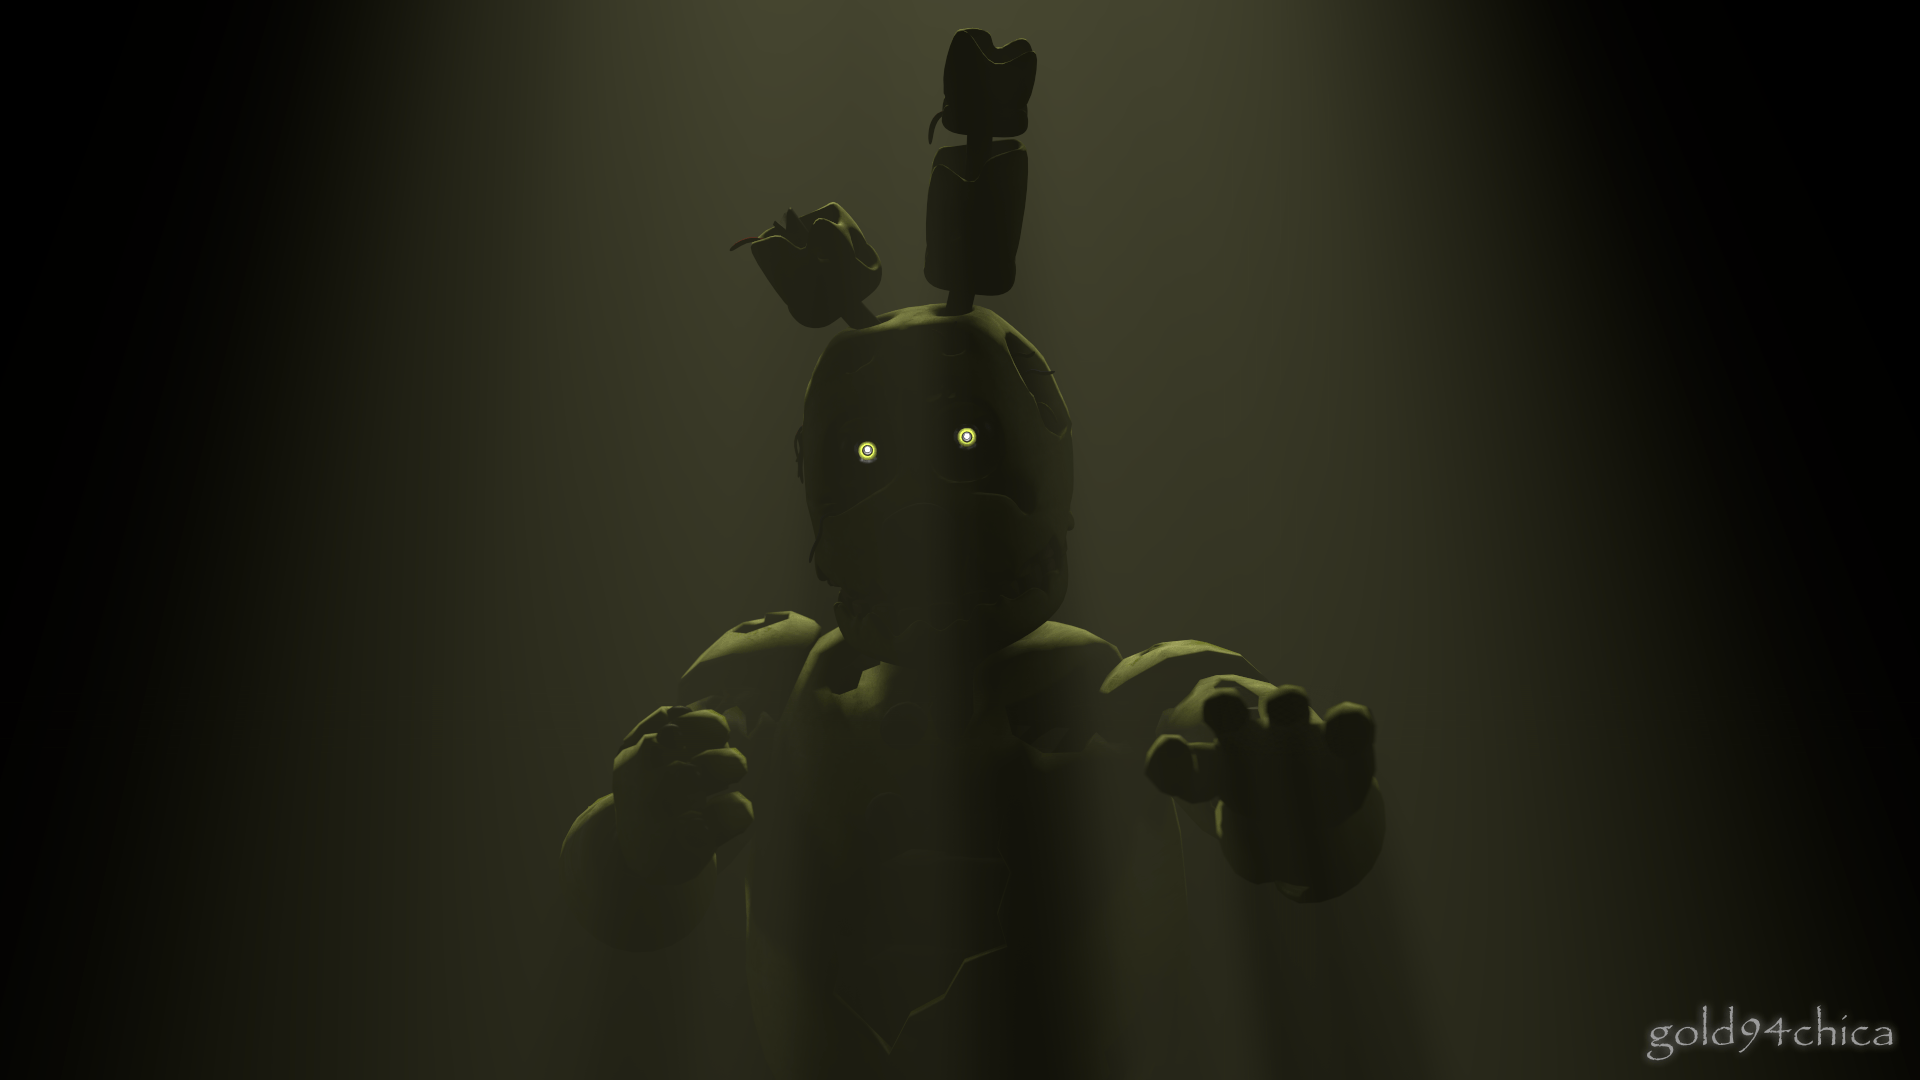 Wallpaper ID 384320  Video Game Five Nights at Freddys 3 Phone Wallpaper  Springtrap Five Nights At Freddys 1080x1920 free download